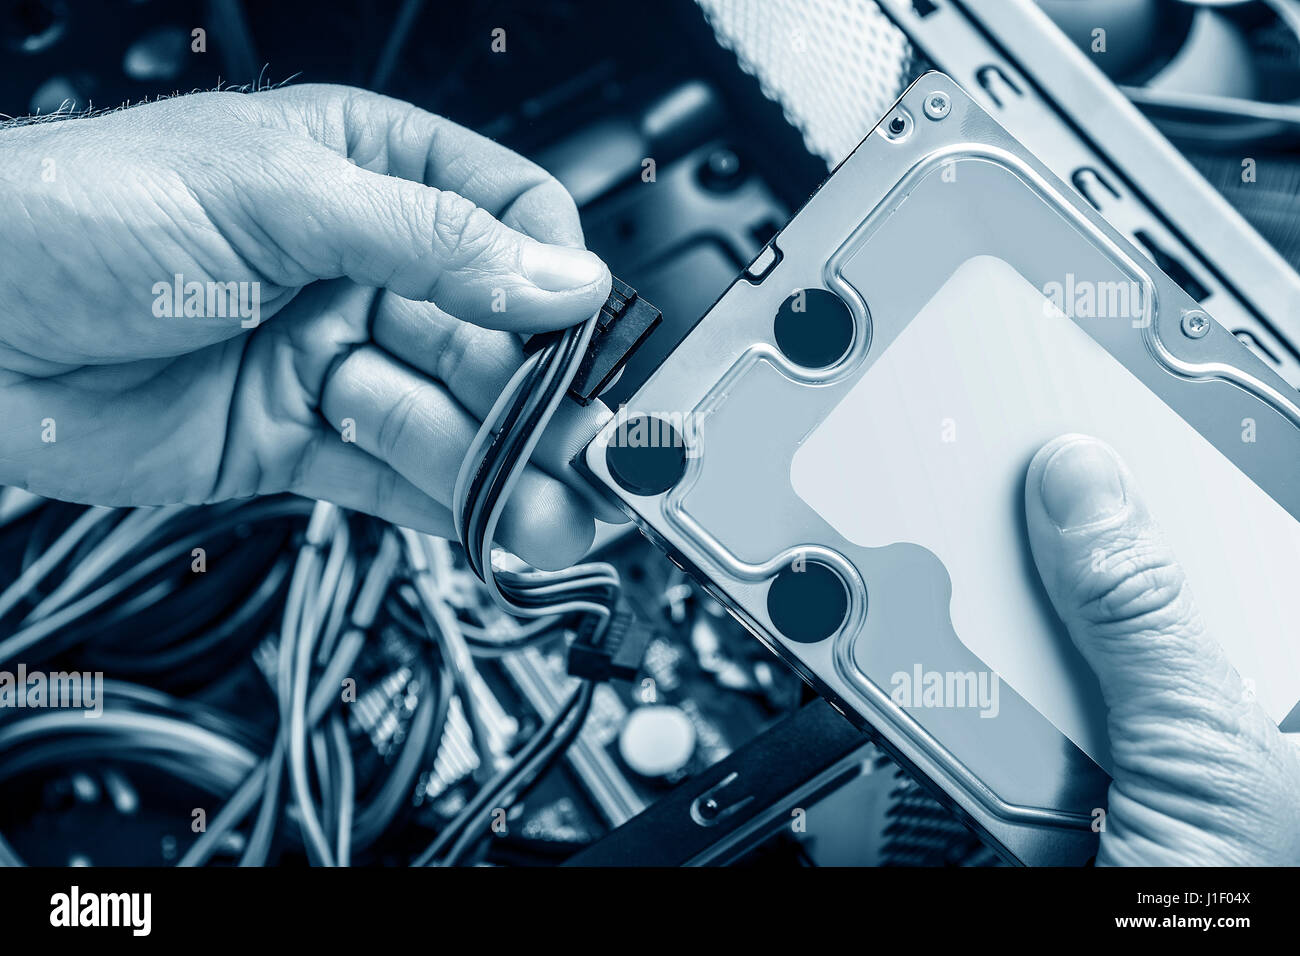 Connect the hard drive. Stock Photo